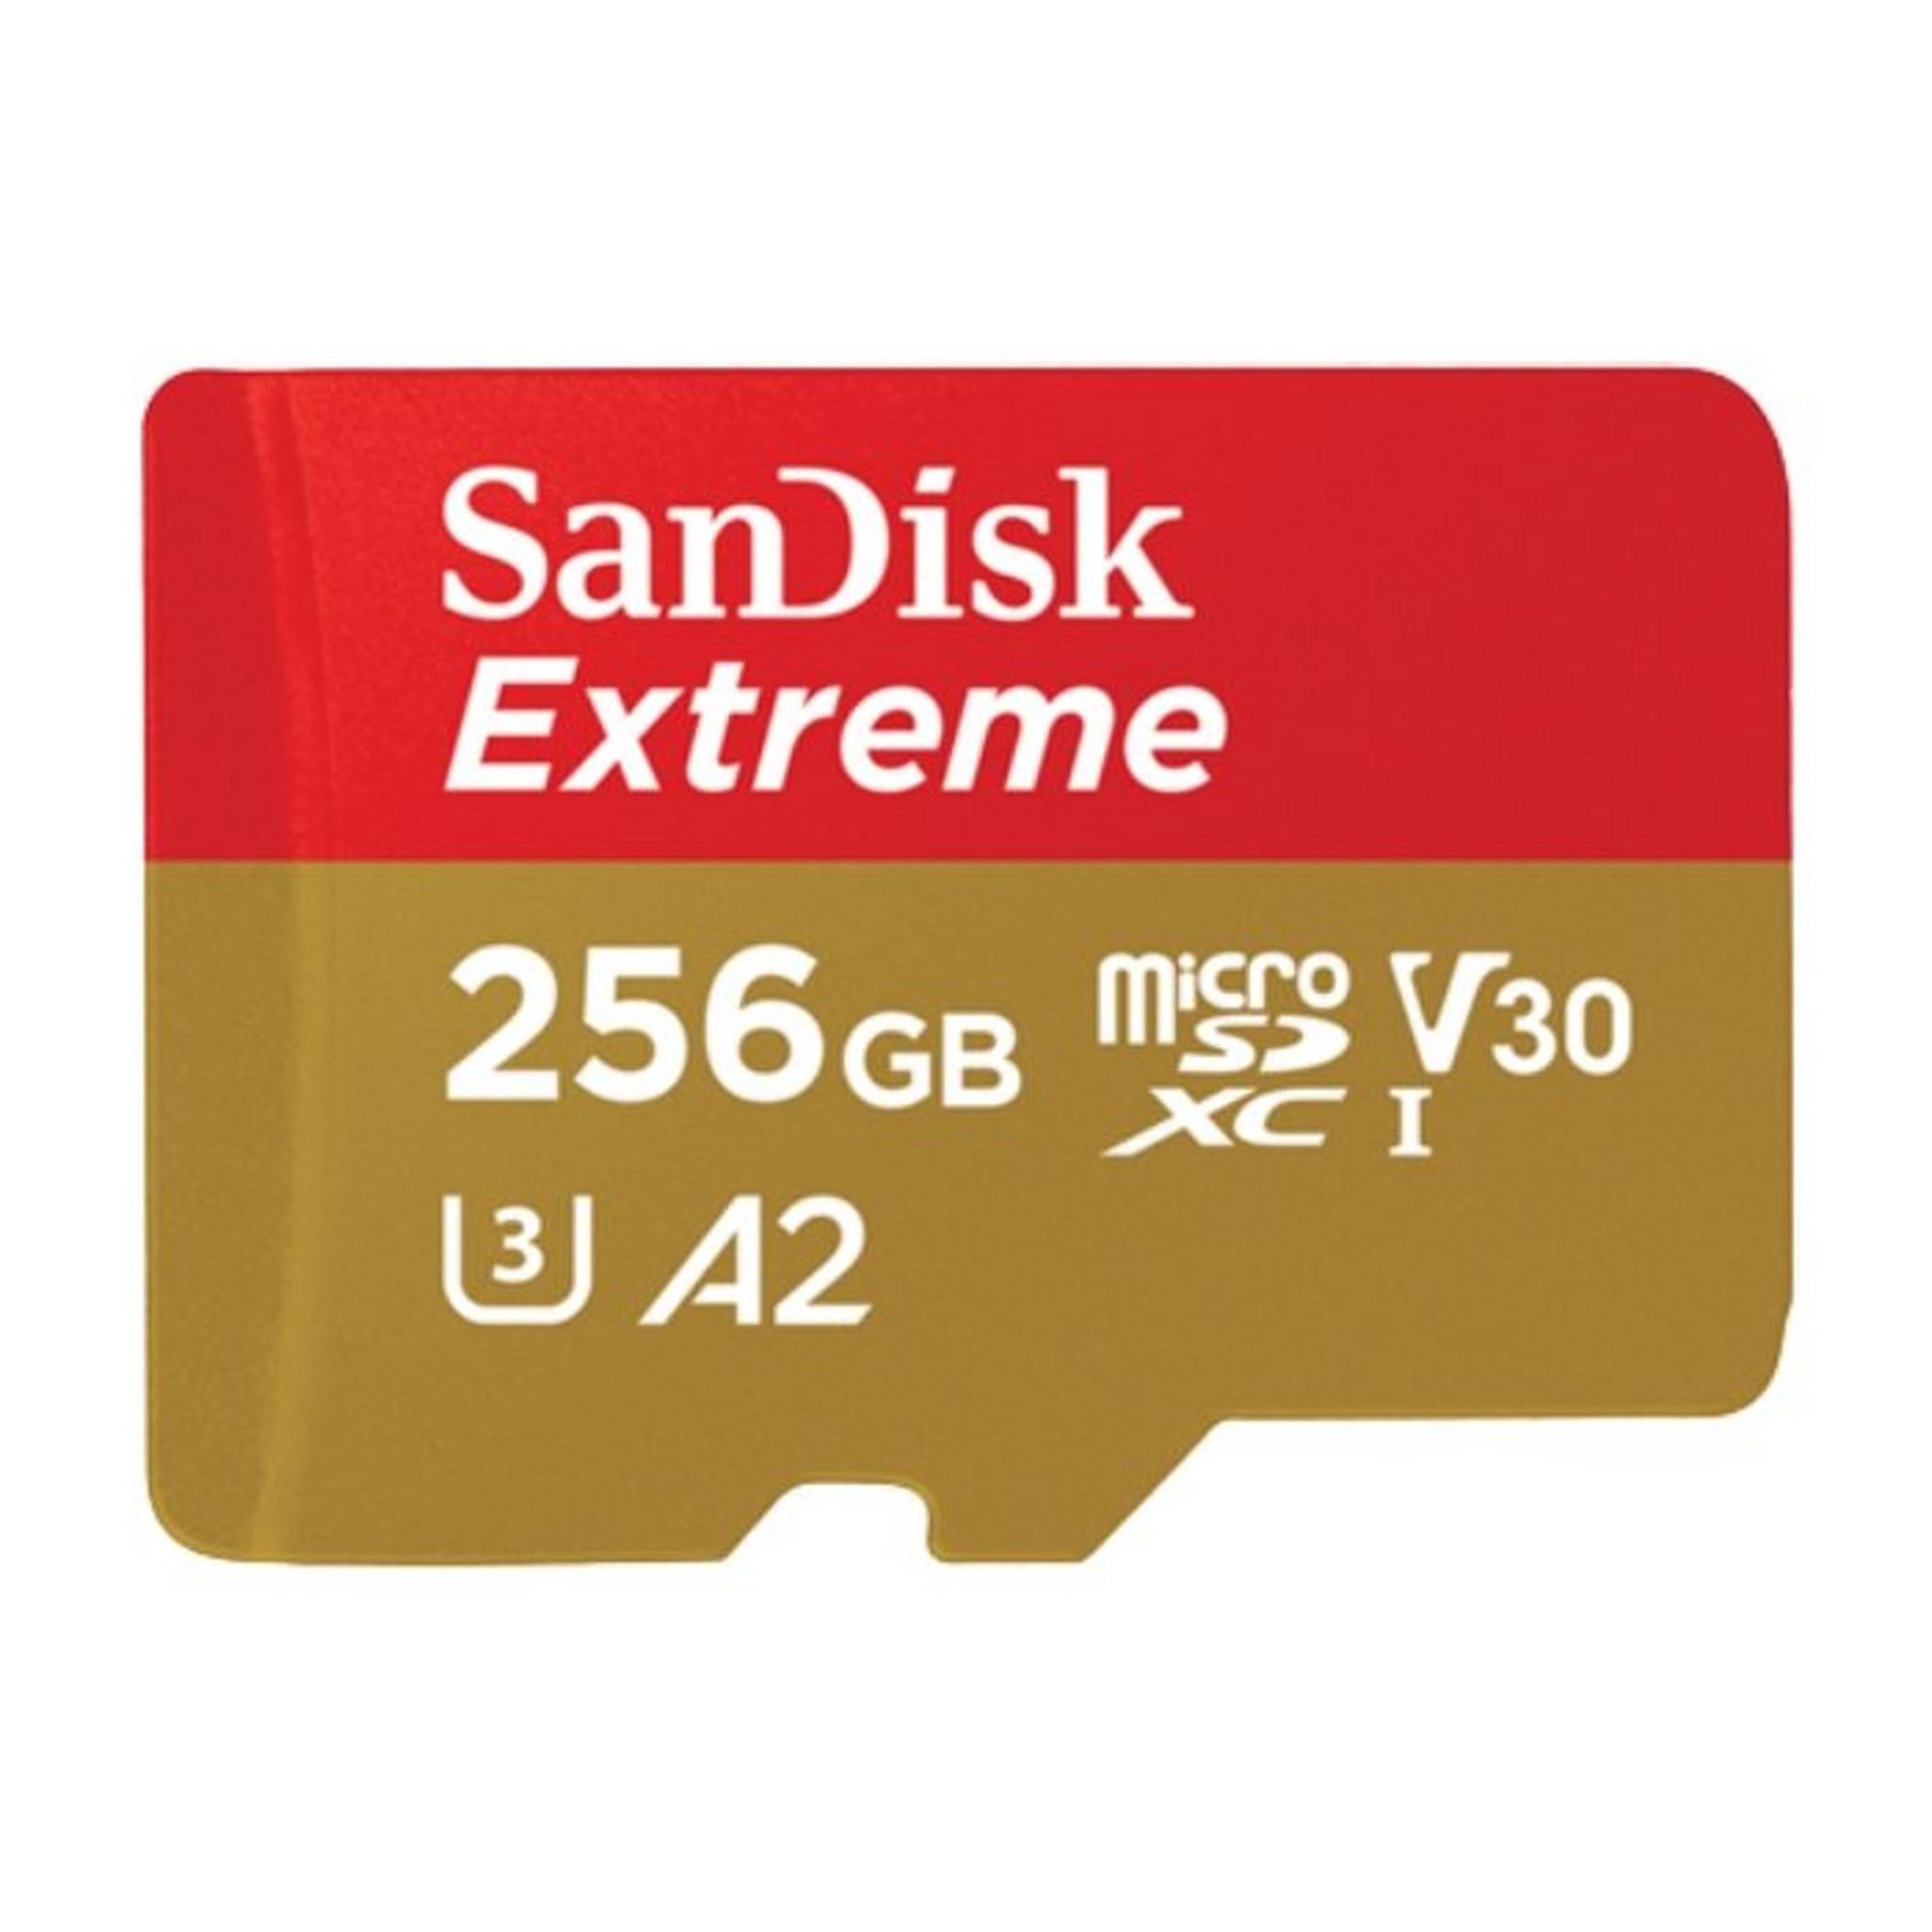 Sandisk  Extreme 256GB MicroSD Card for Mobile Gaming